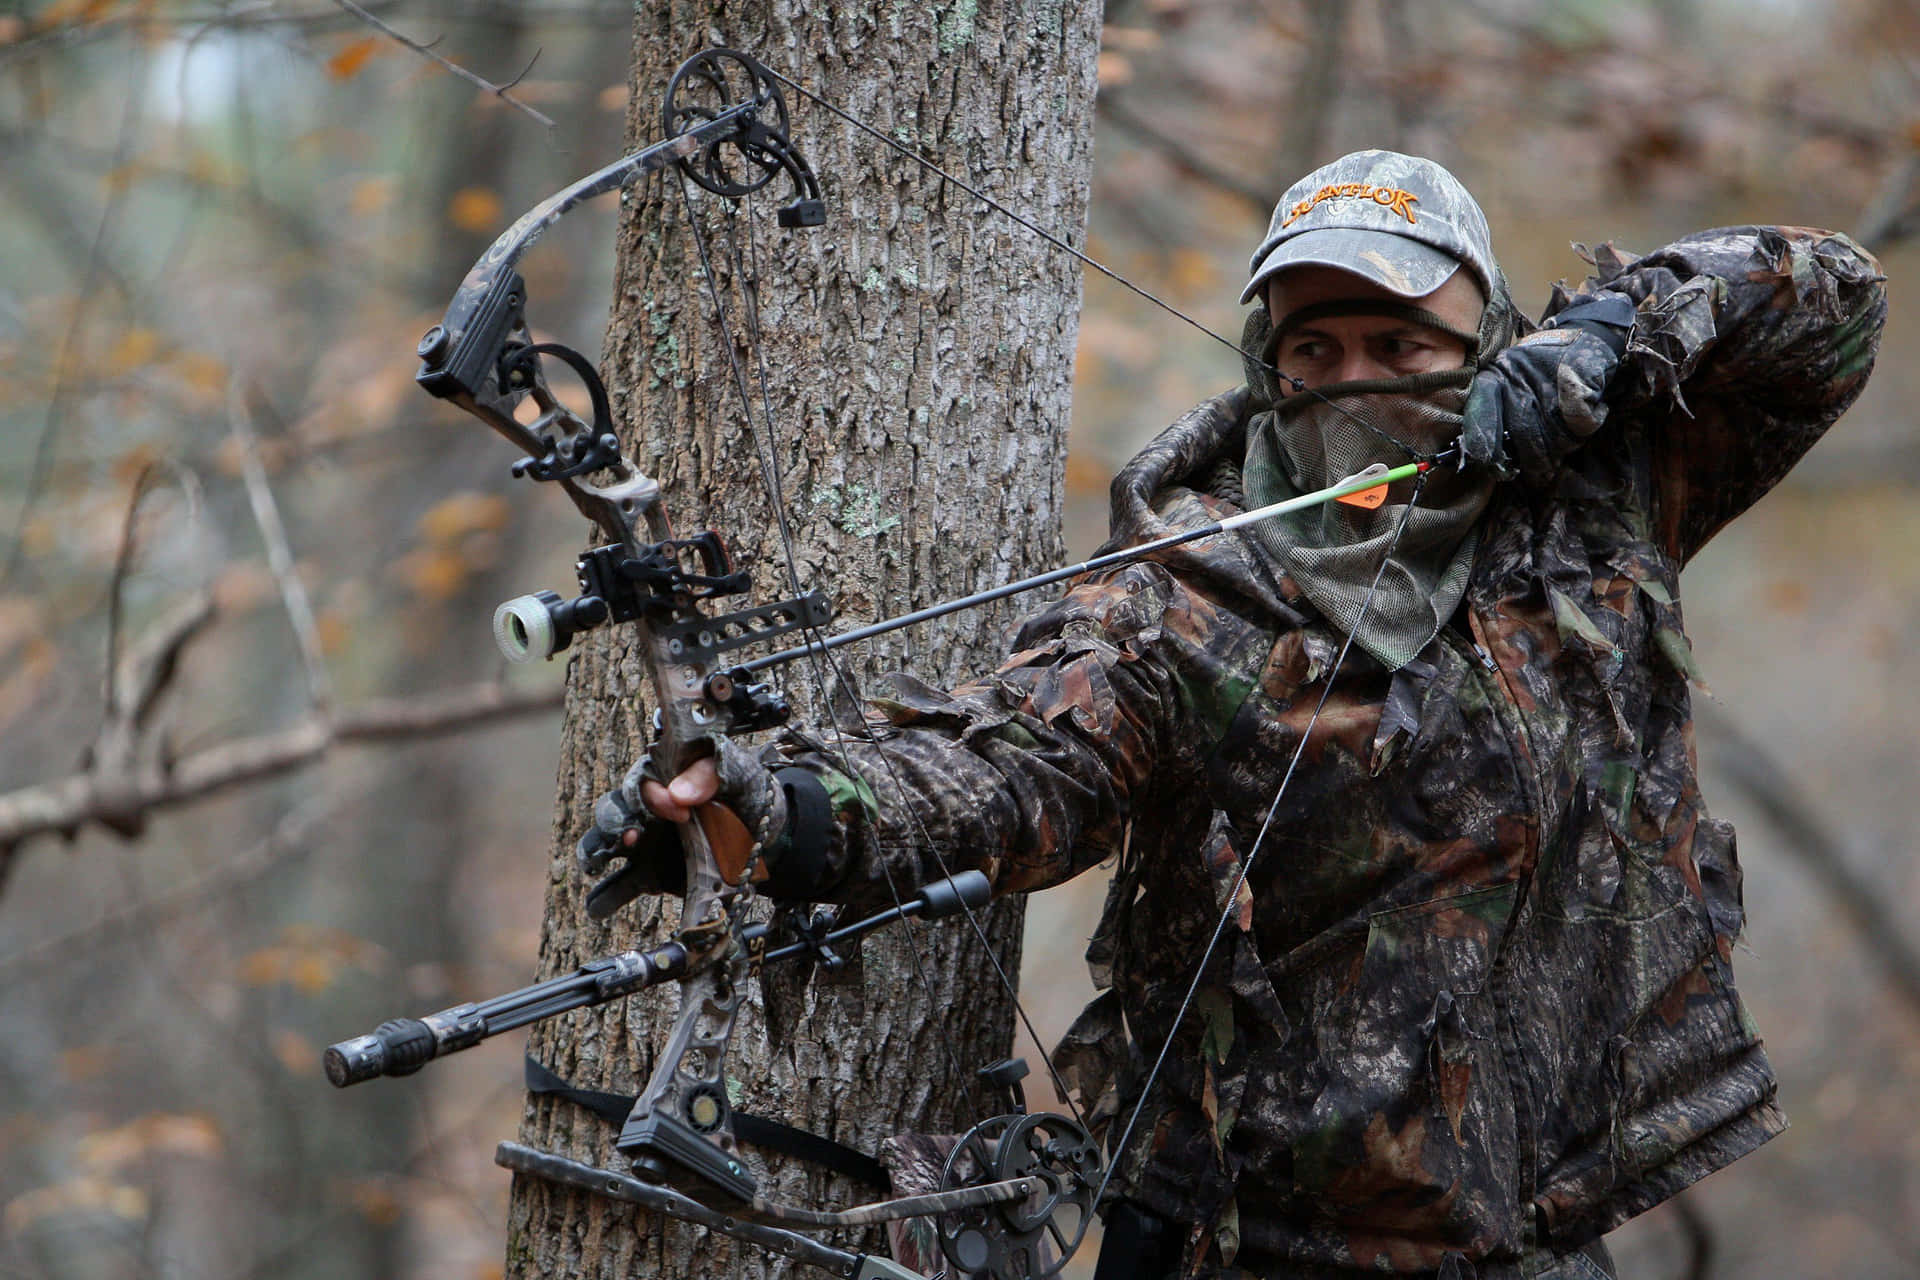 A Man In Camouflage Is Holding A Bow And Arrow